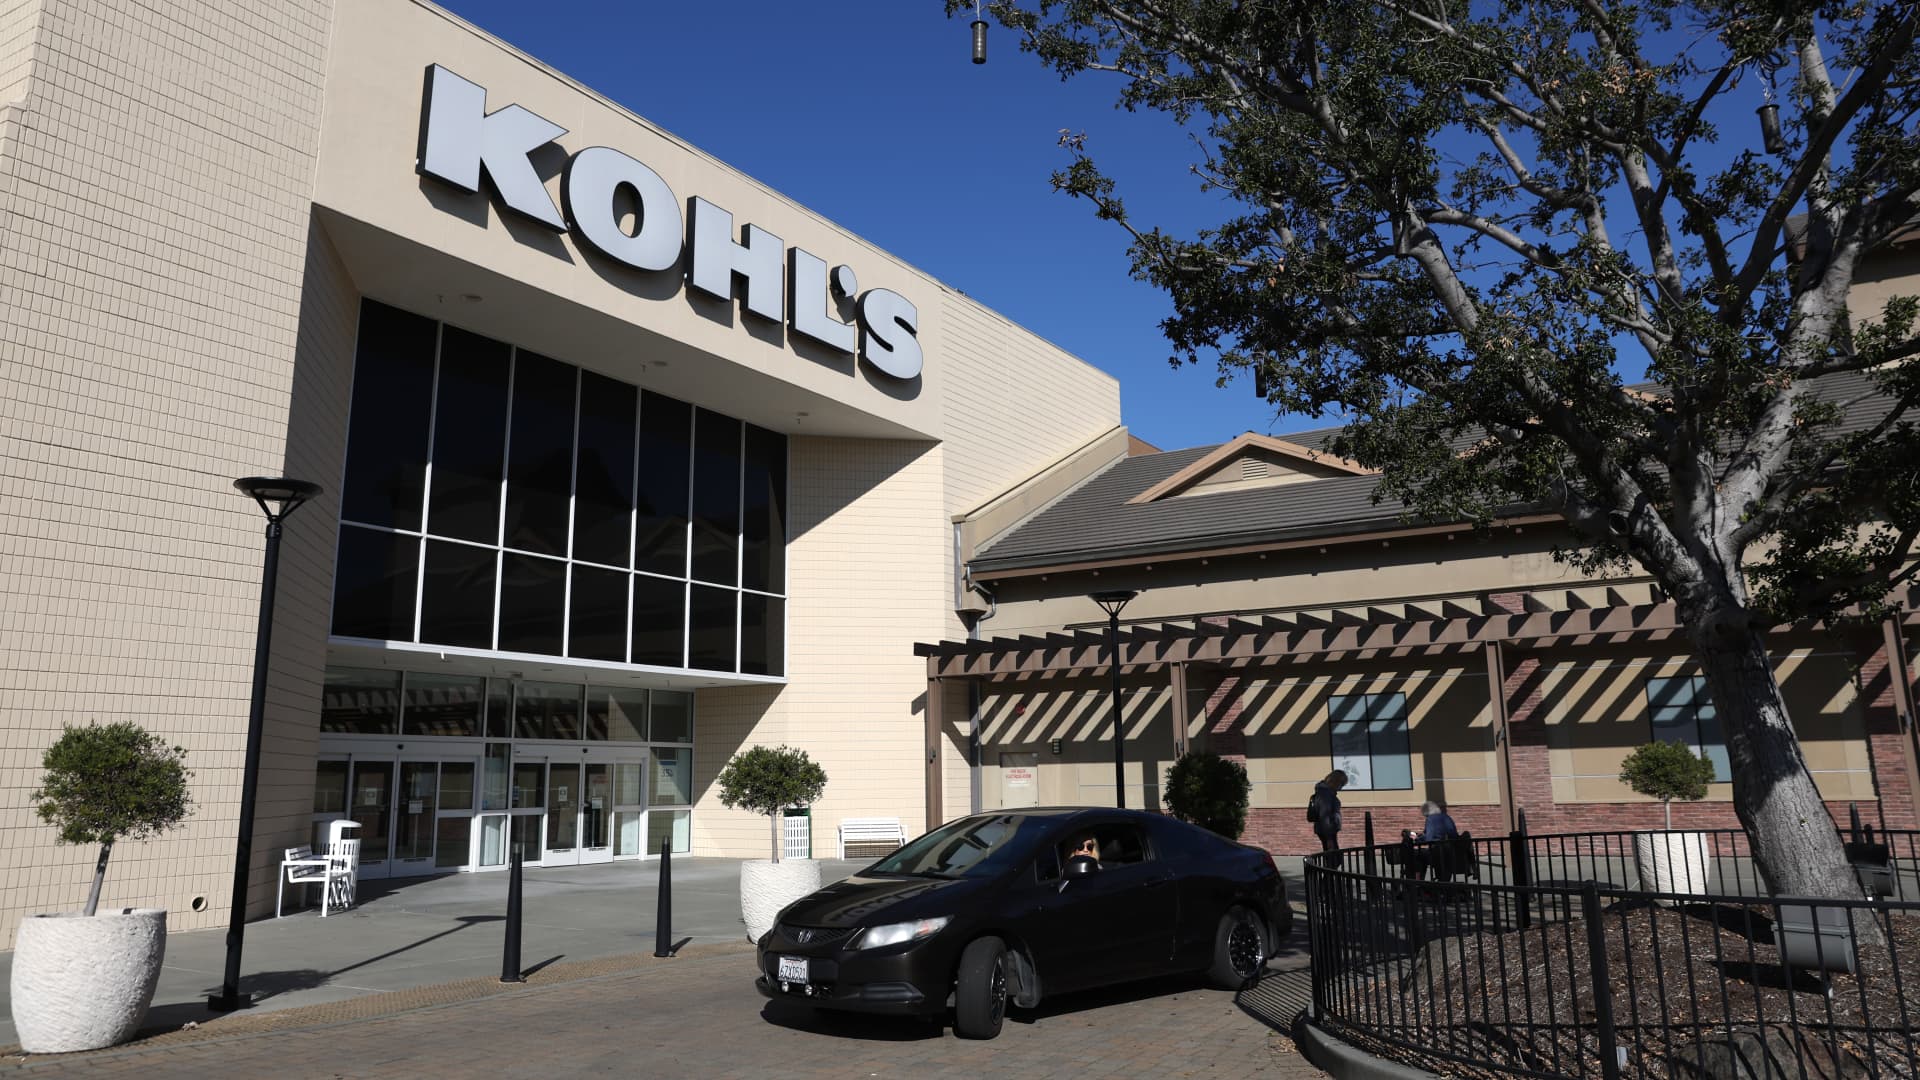 The Kohl's logo is displayed on the exterior of a Kohl's store on January 24, 2022 in San Rafael, California.